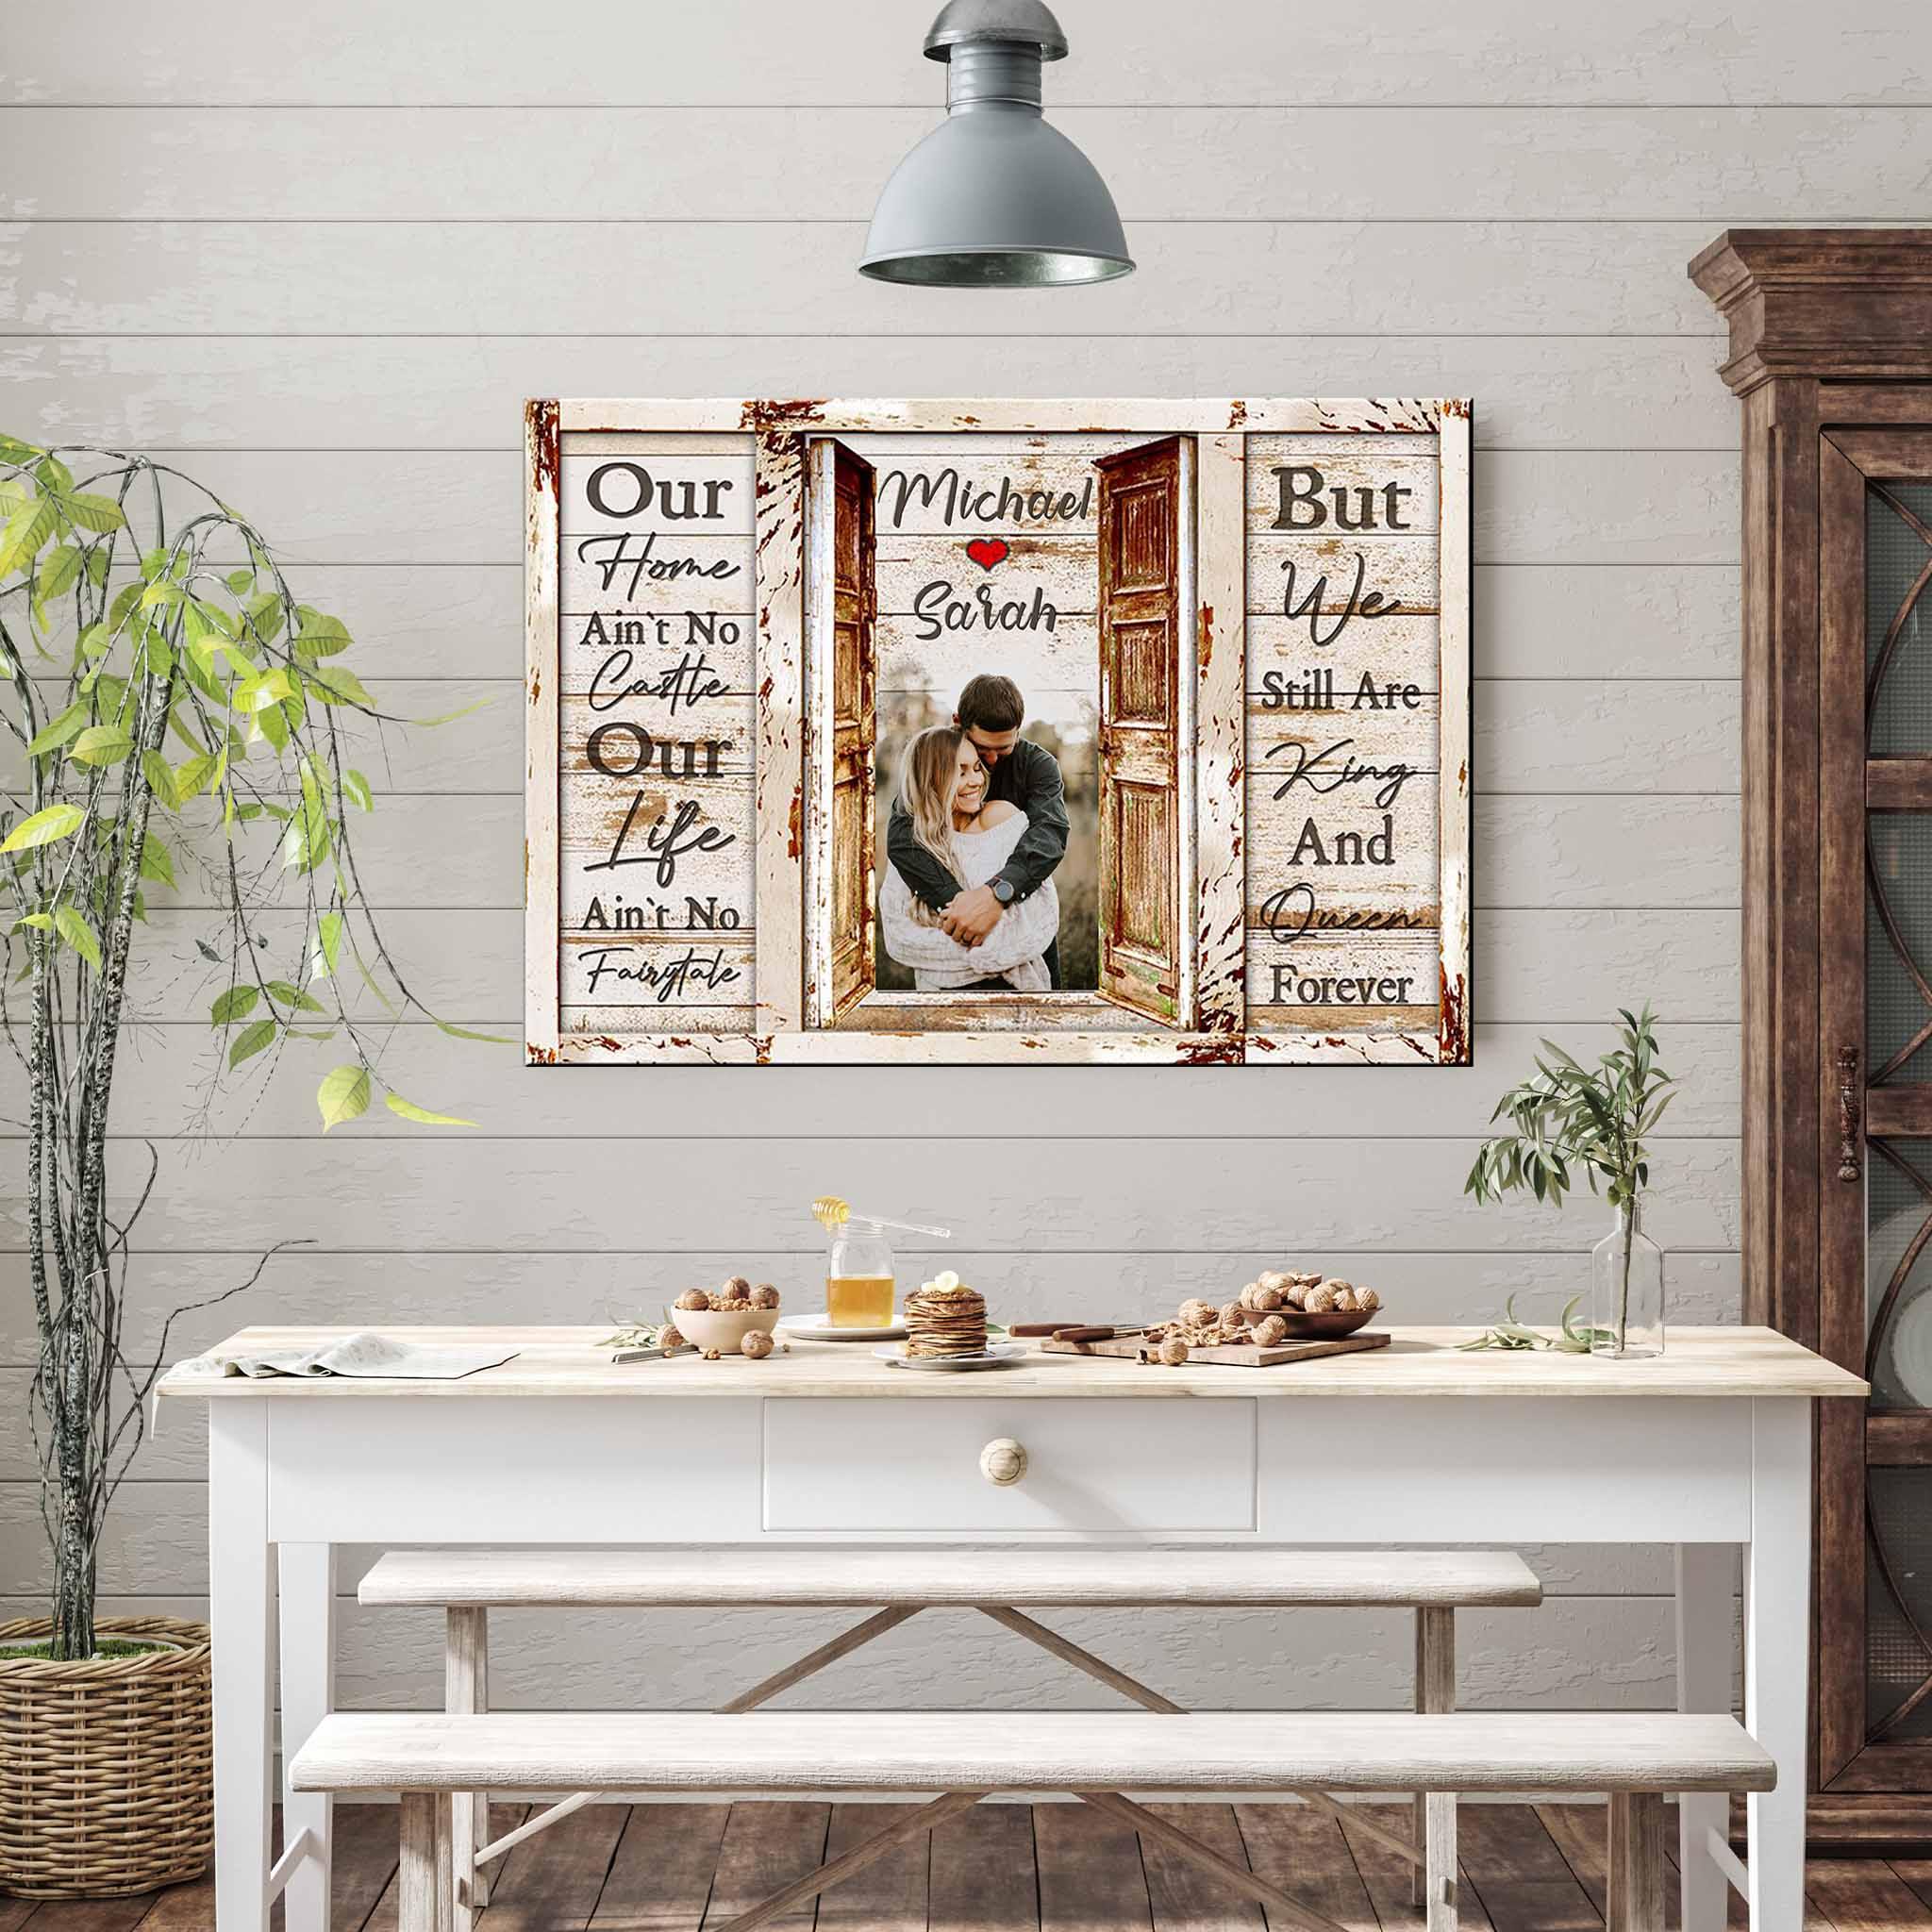 Rustic Doors Couple Saying Photo v1 Personalized CanvasCustomly Gifts